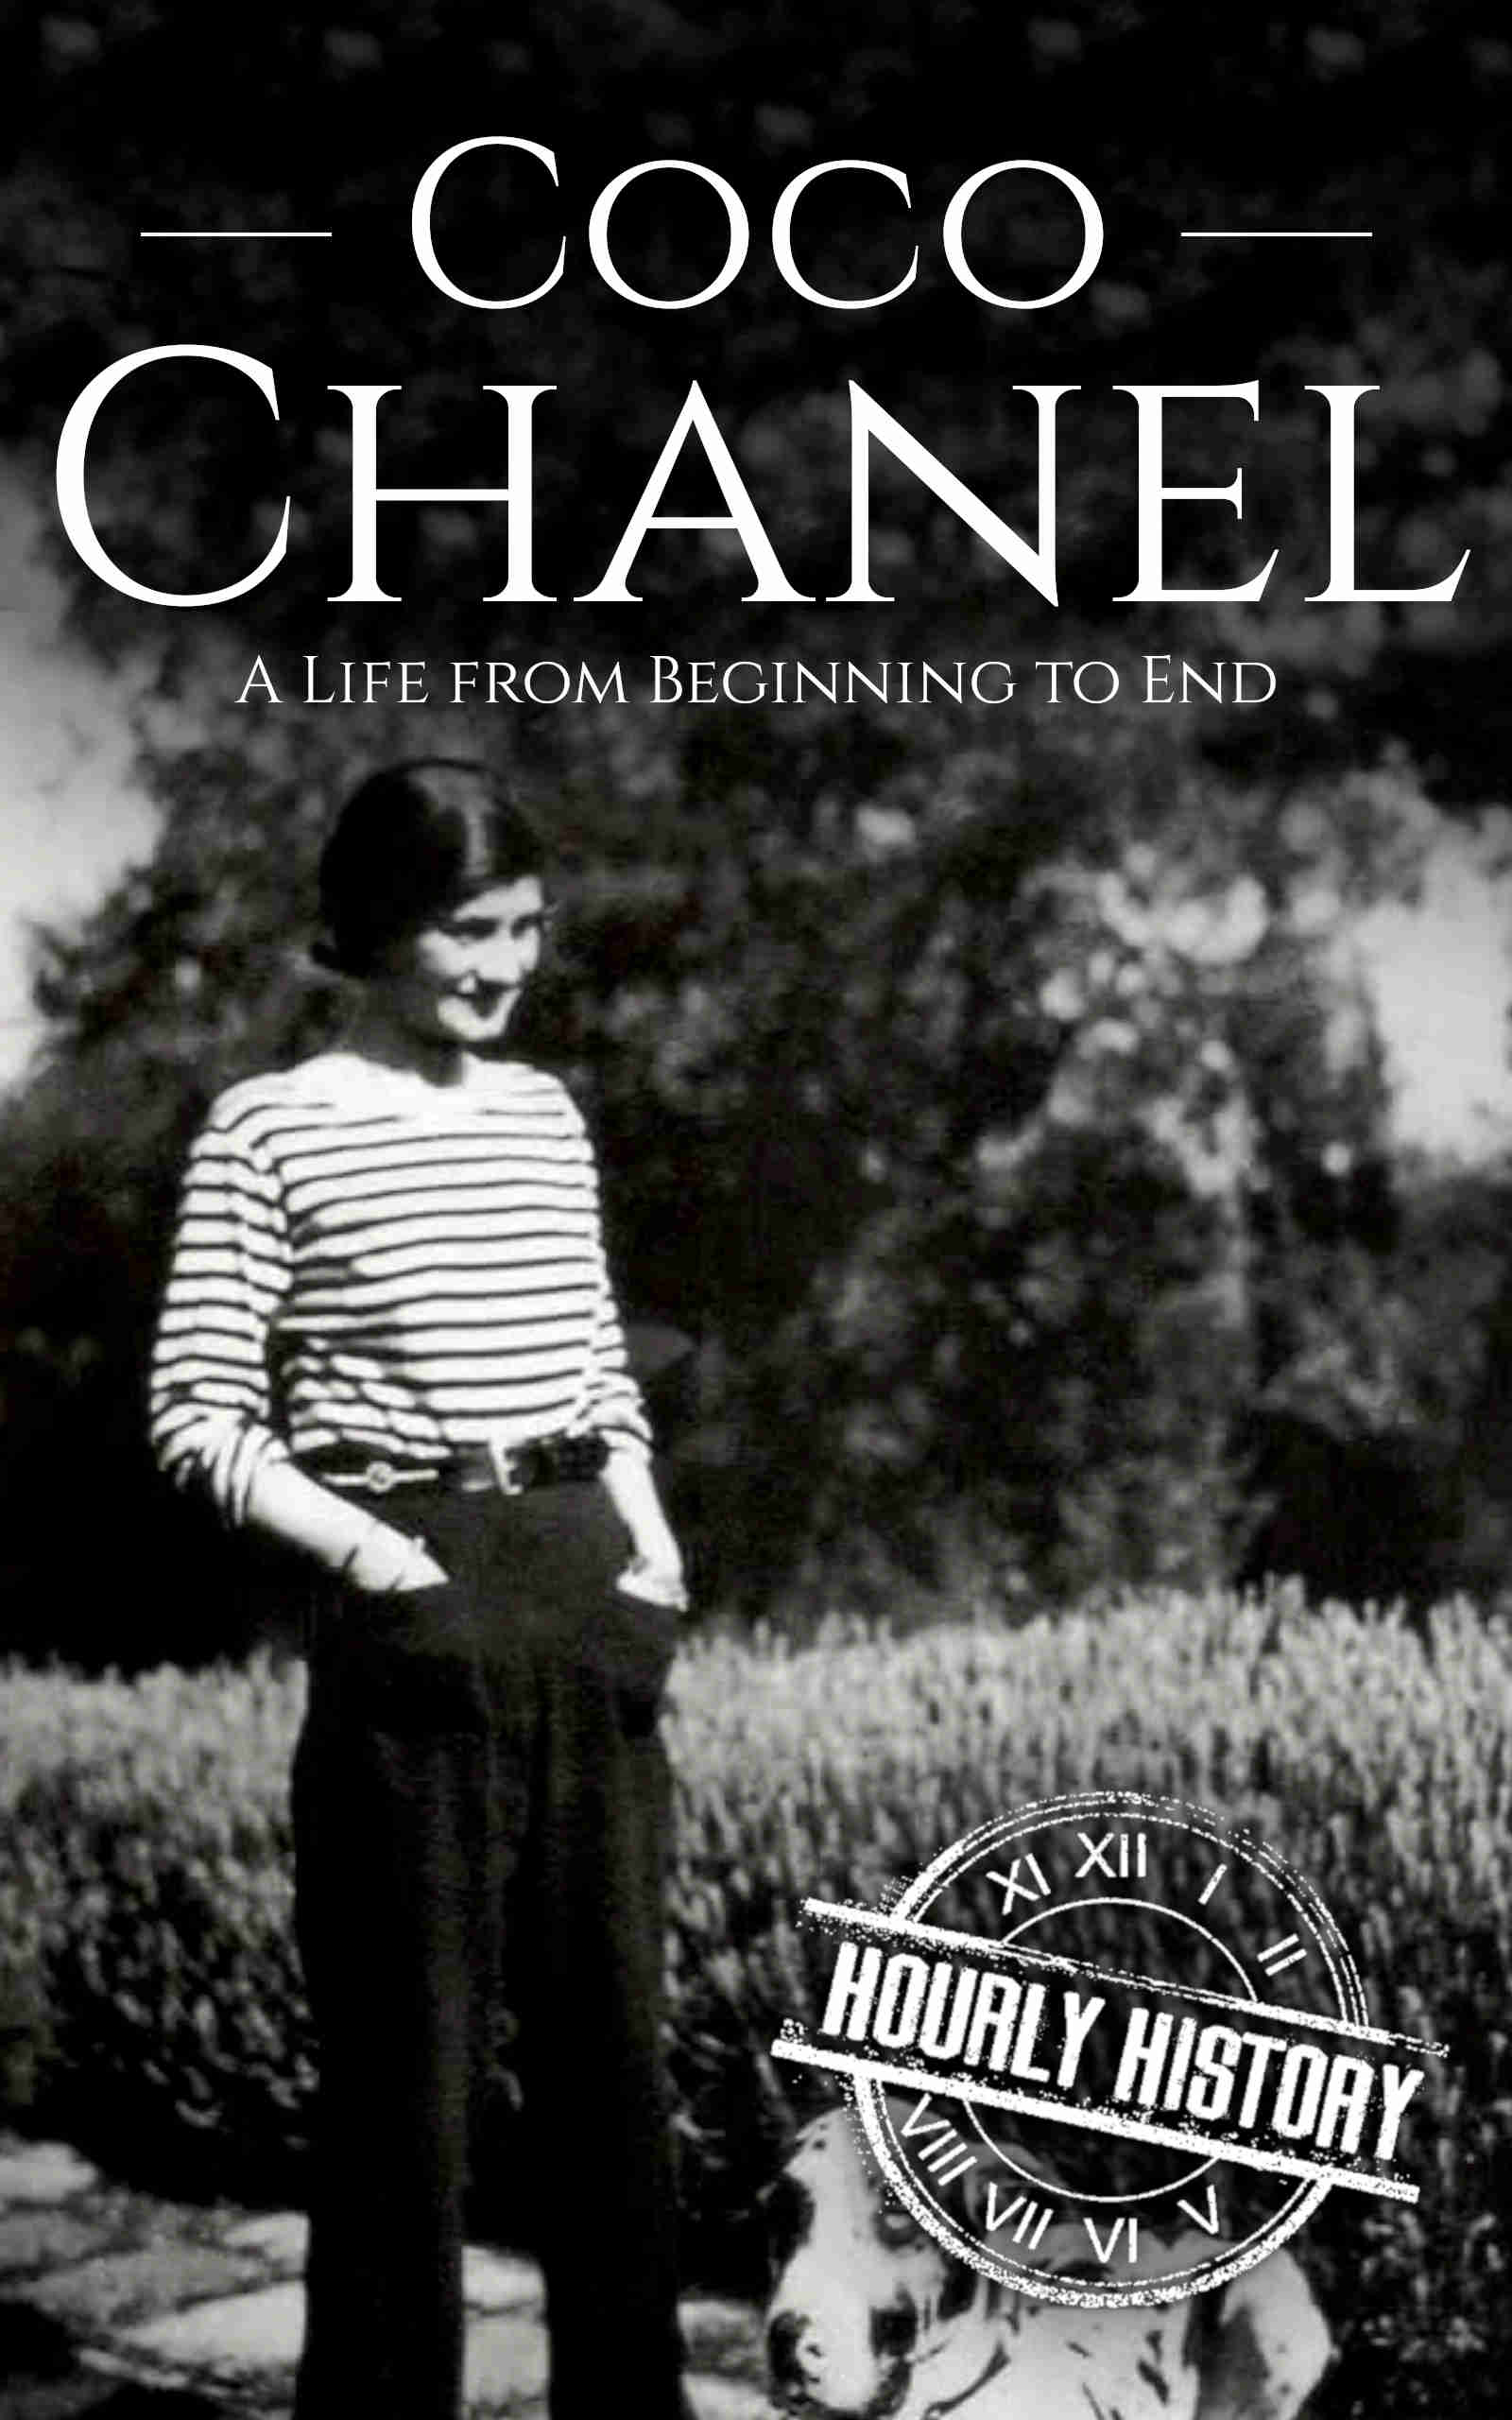 biography books on coco chanel